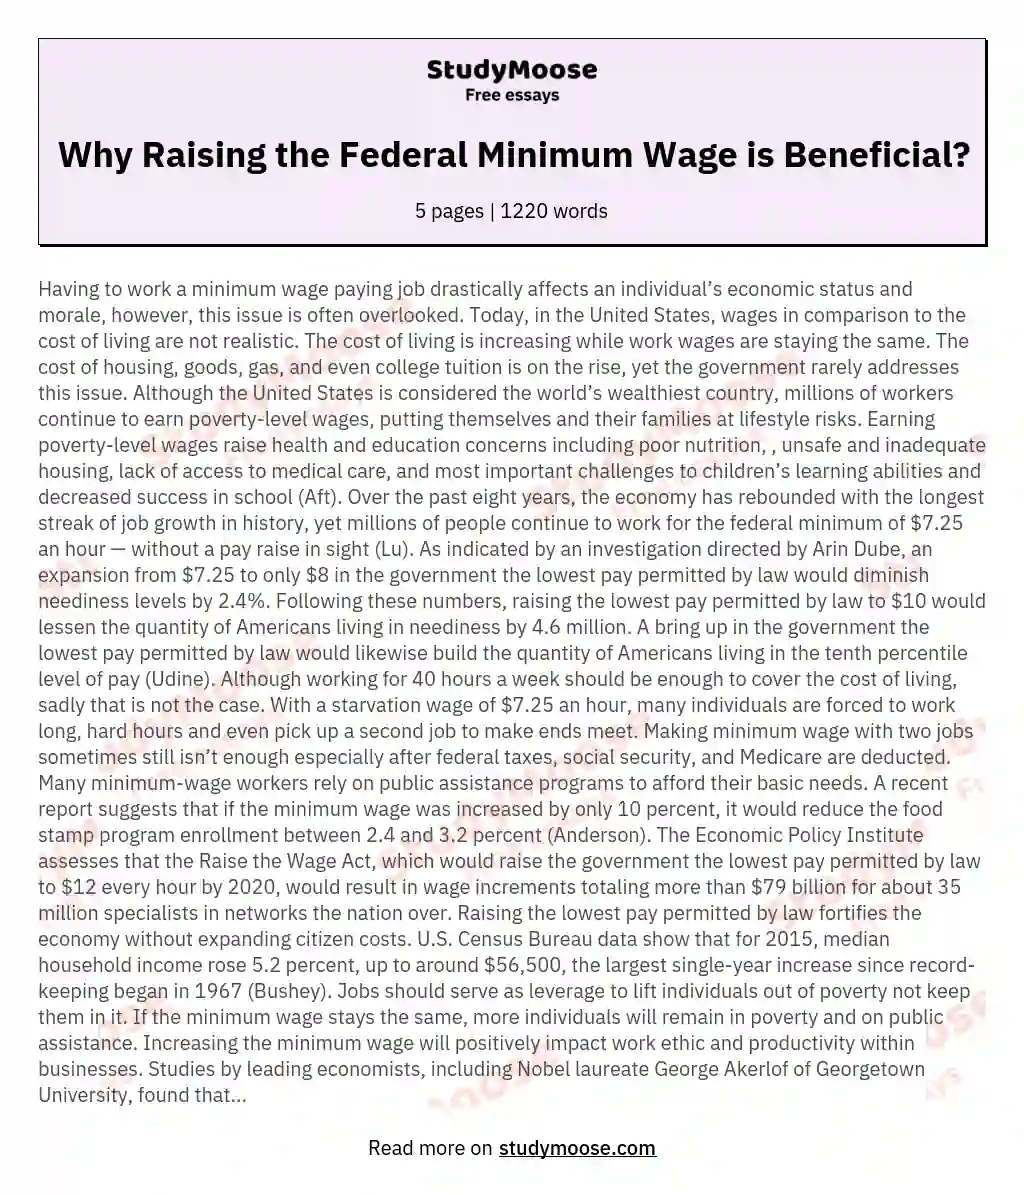 Why Raising the Federal Minimum Wage is Beneficial?